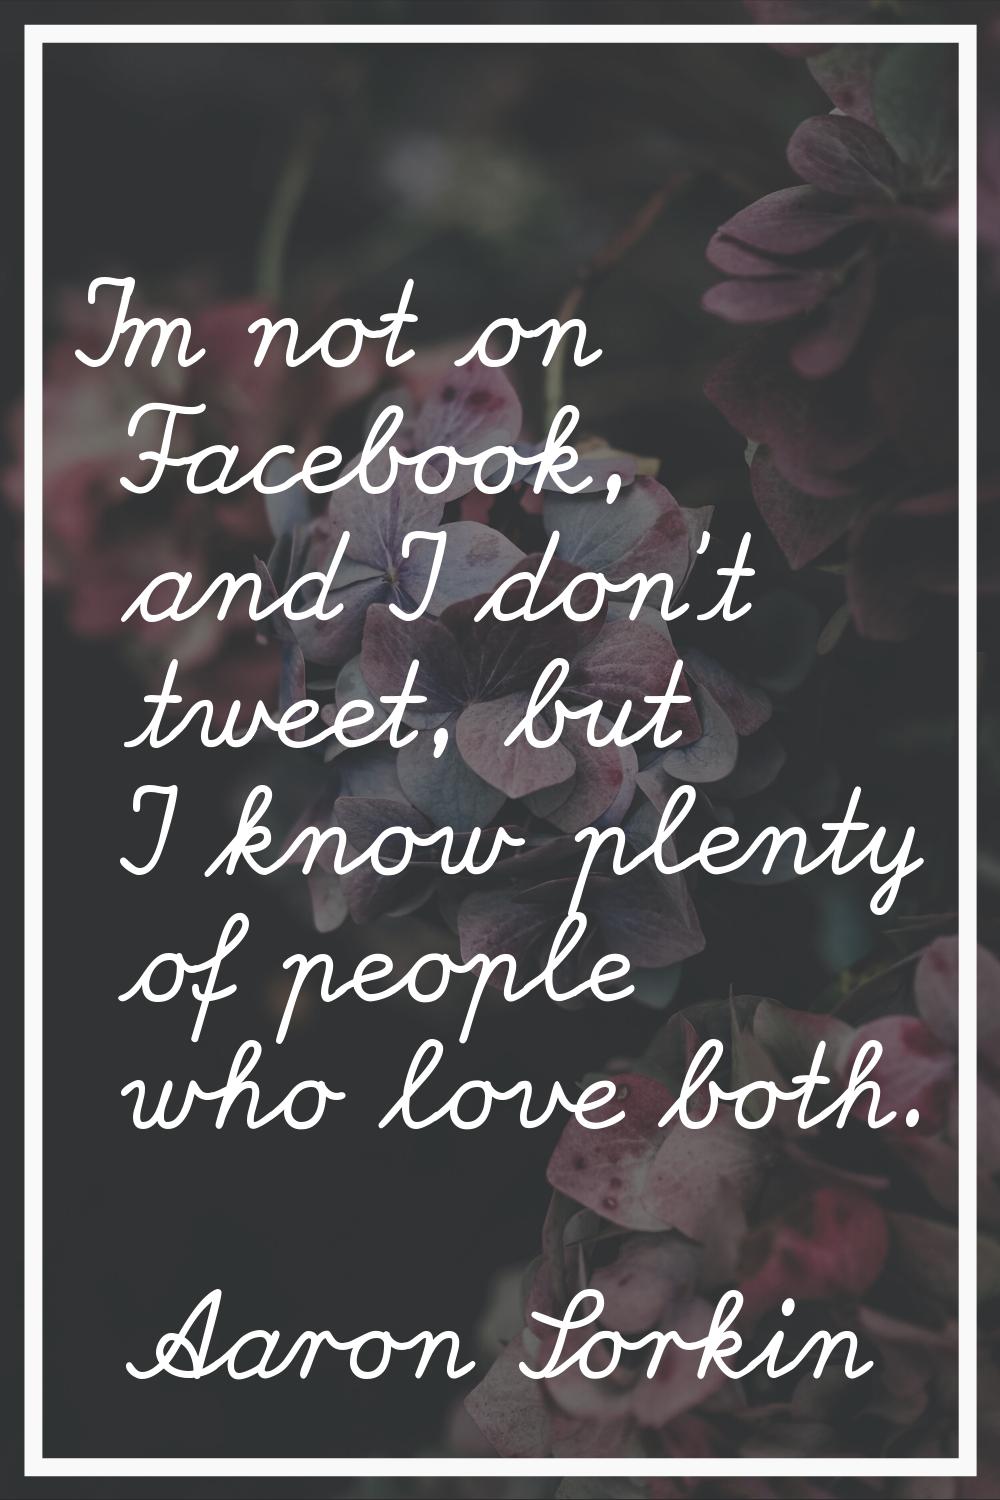 I'm not on Facebook, and I don't tweet, but I know plenty of people who love both.